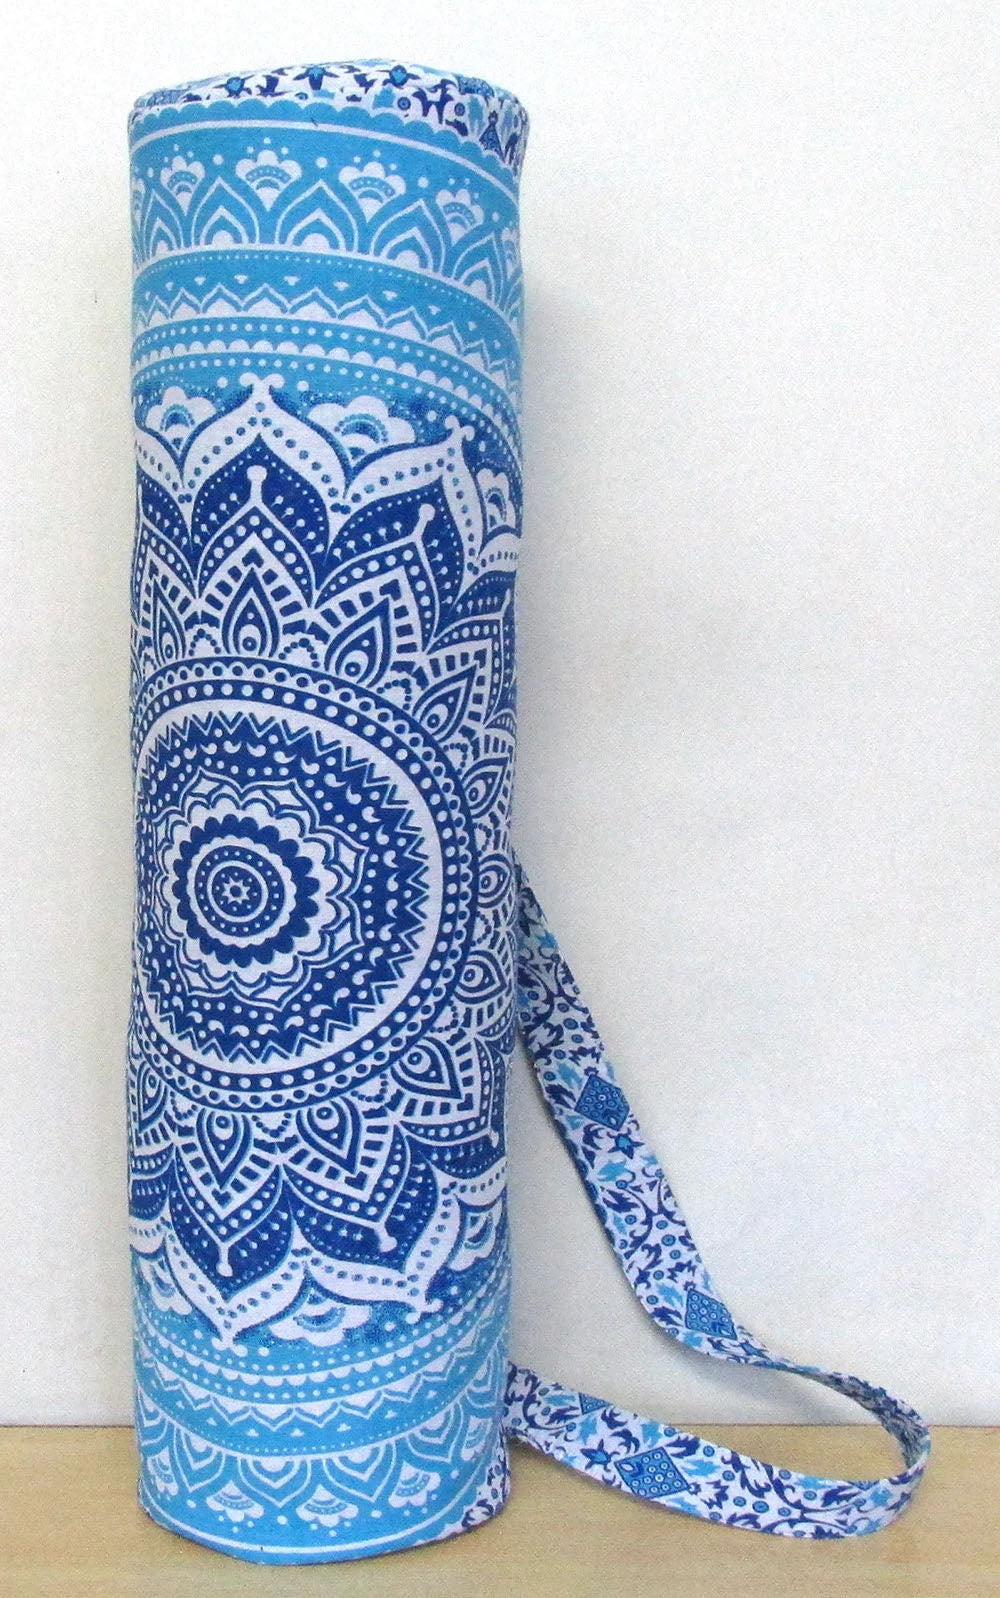 Handcrafted Cottton Yoga Bag for Yogi - Clearance